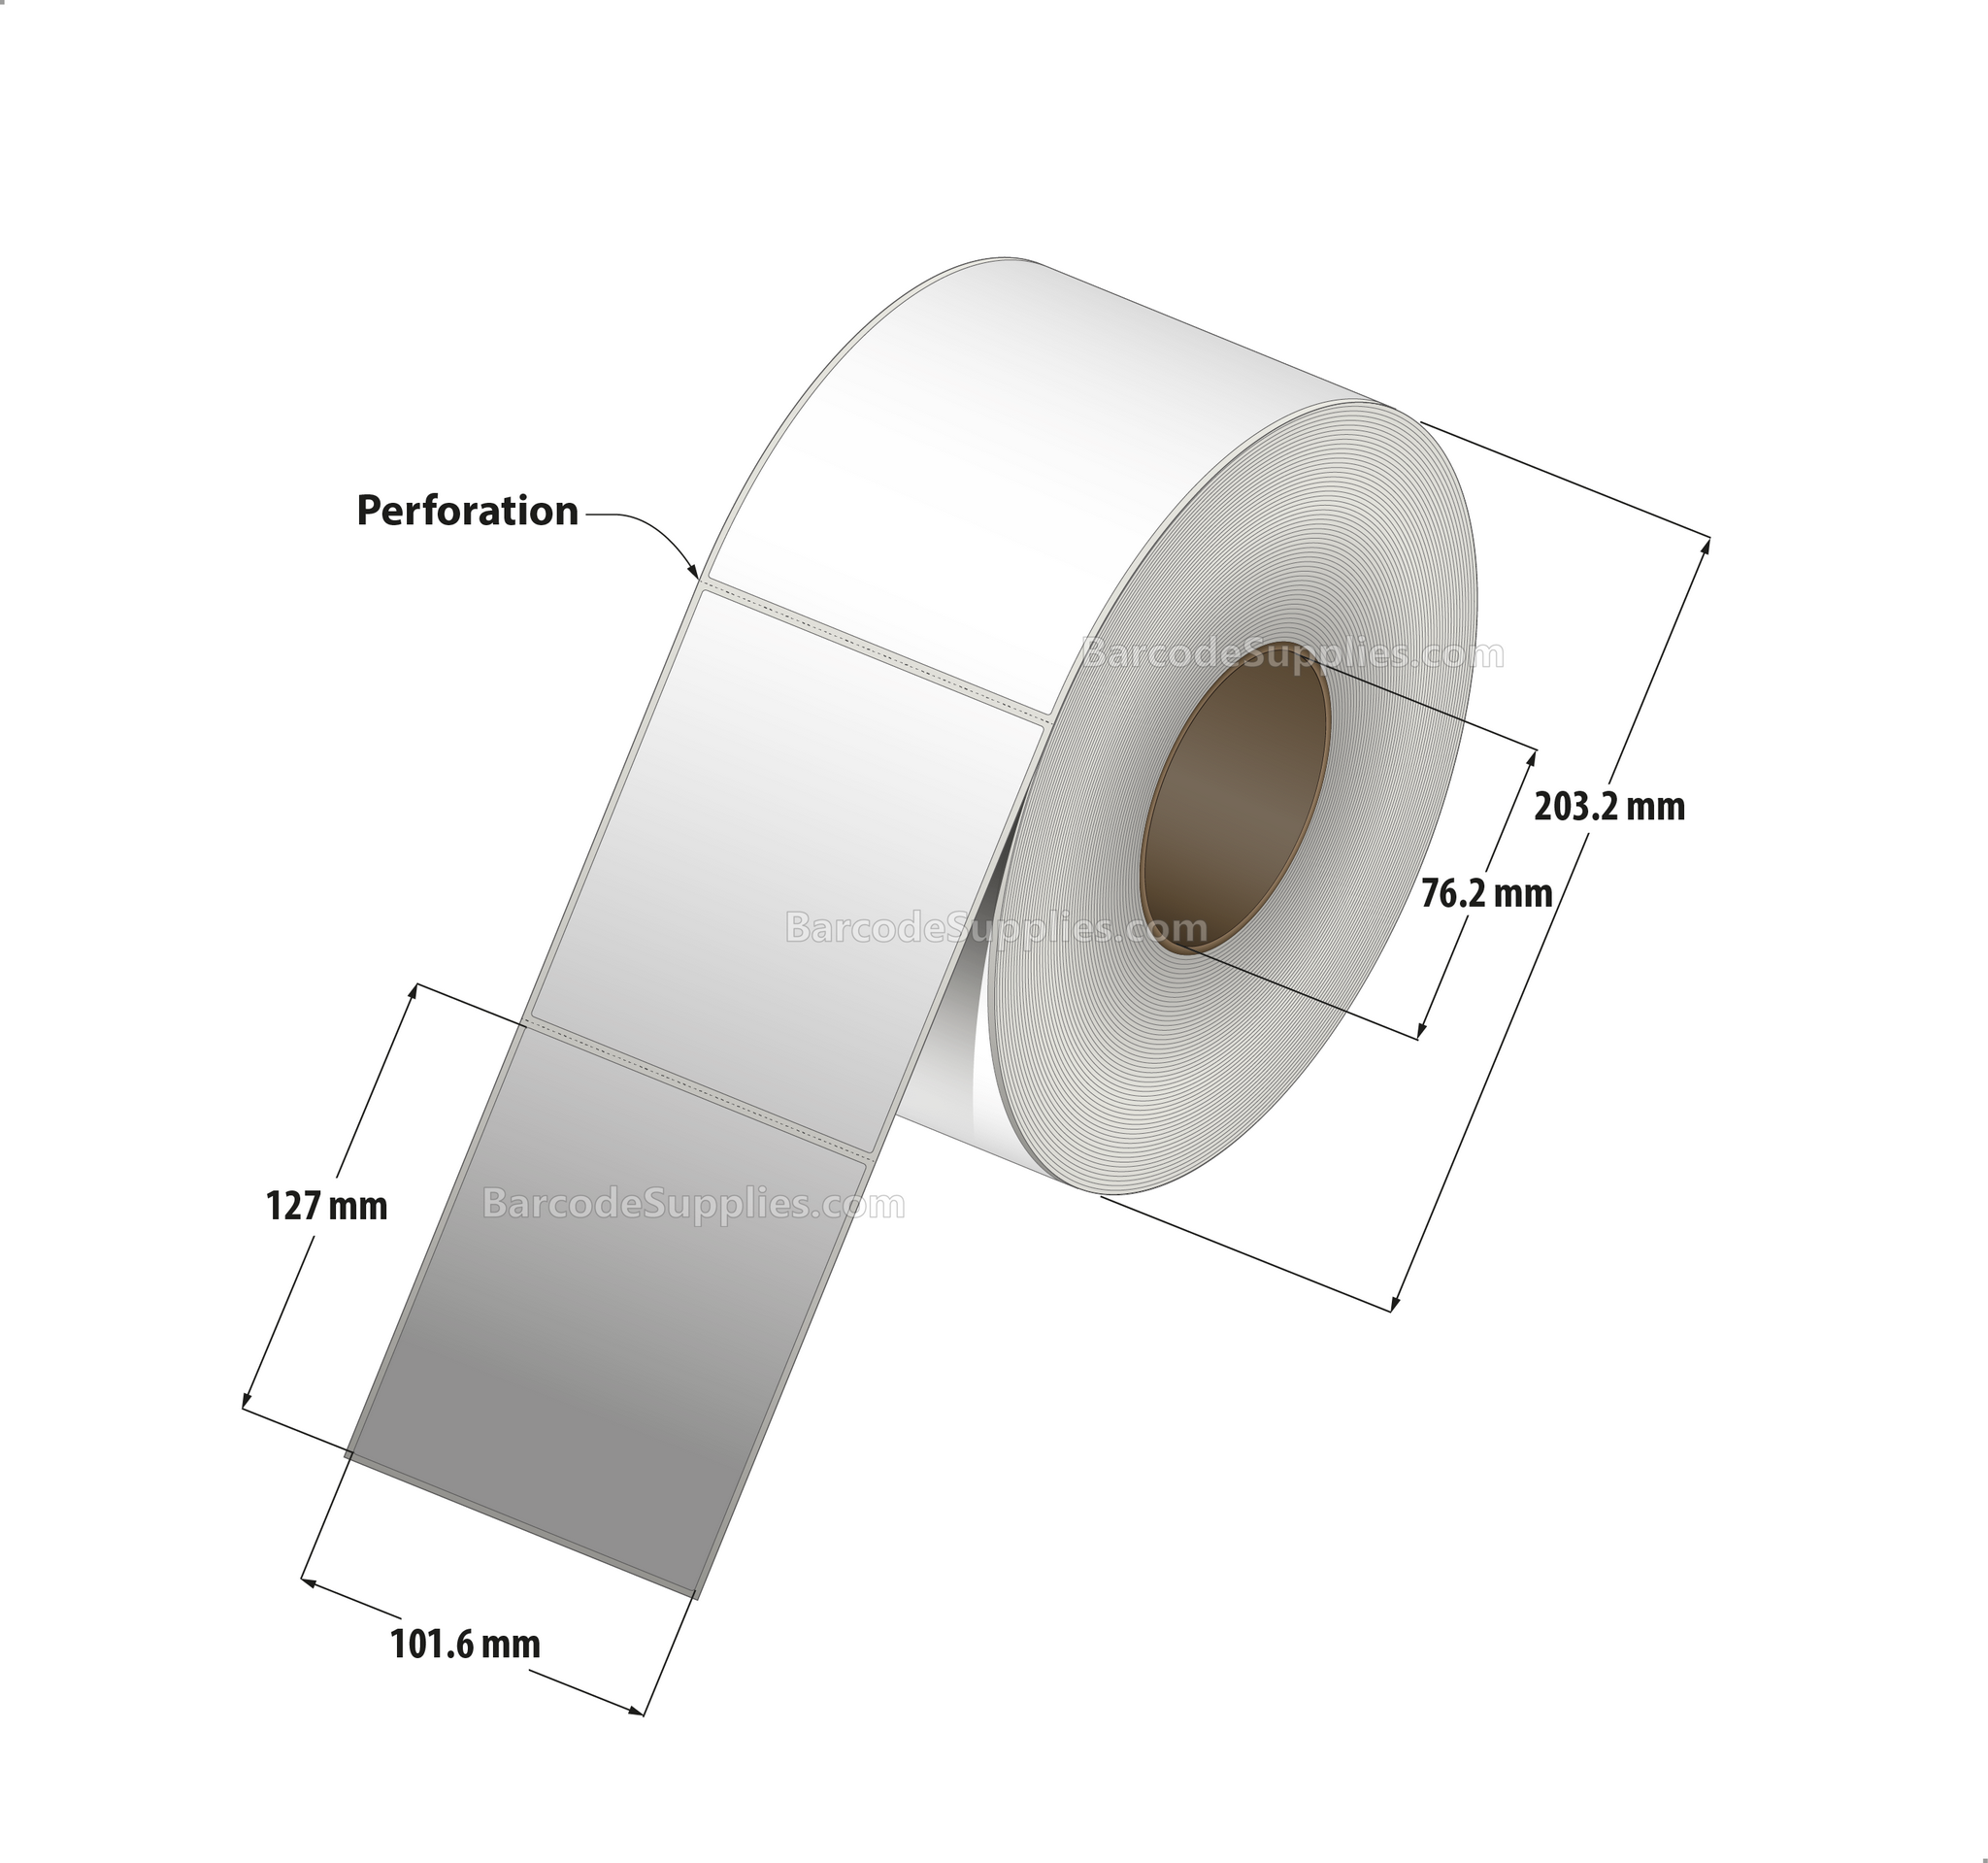 Products 4 x 5 Thermal Transfer White Labels With Permanent Adhesive - Perforated - 1200 Labels Per Roll - Carton Of 4 Rolls - 4800 Labels Total - MPN: RT-4-5-1200-3